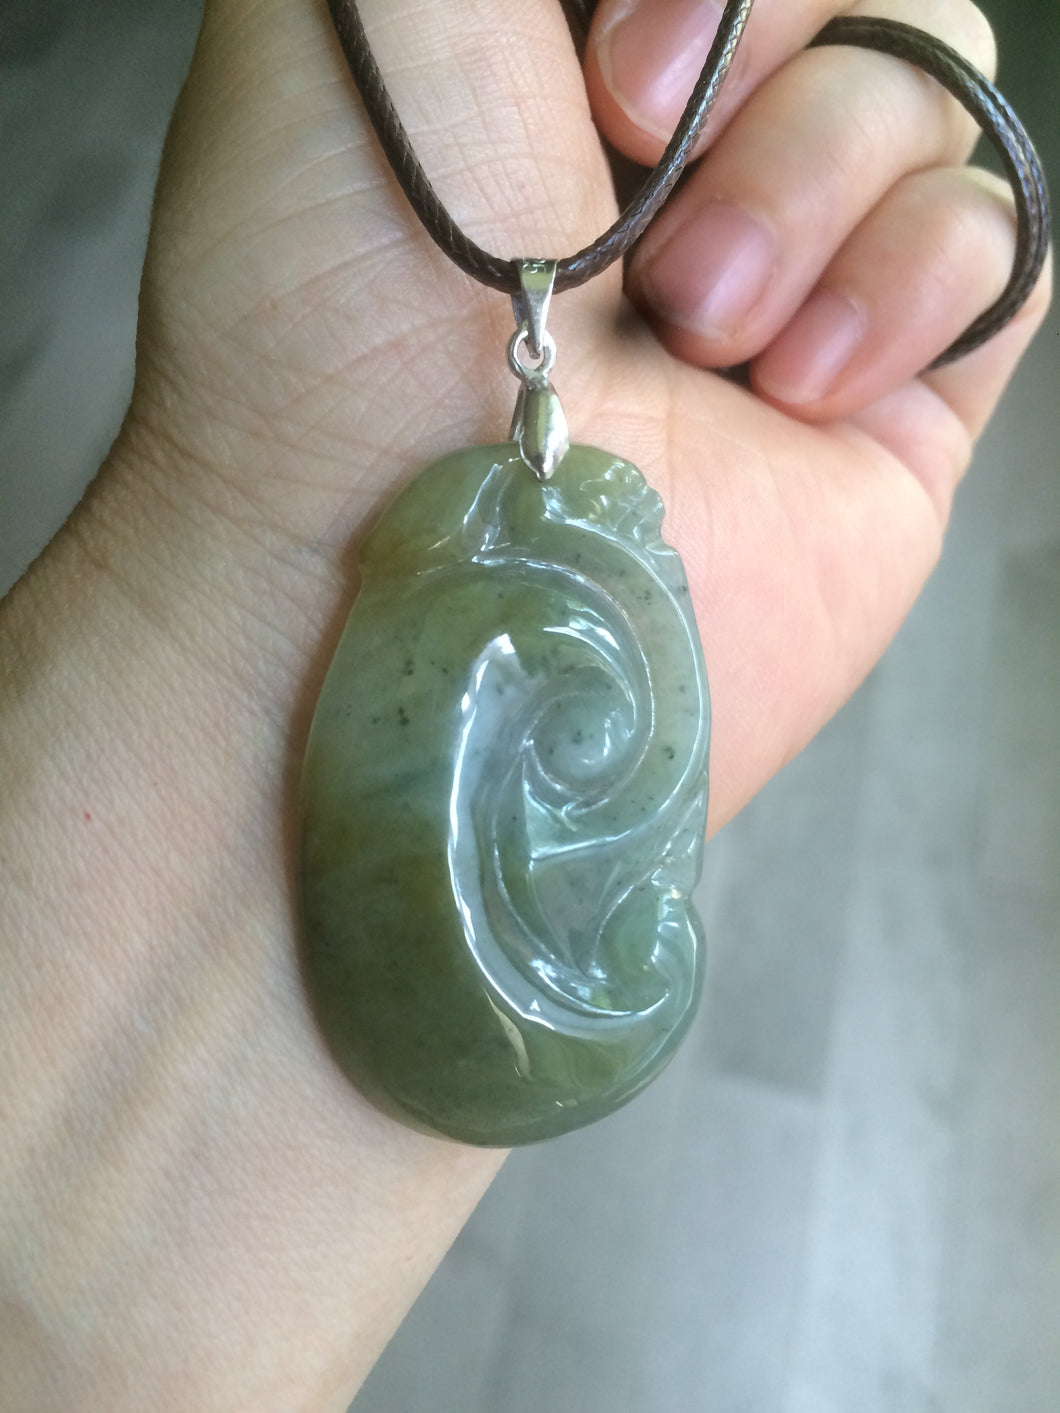 100% Natural type A dark green/gray/blue with flying flowers Jade RuYi(如意) pendant B205-2631